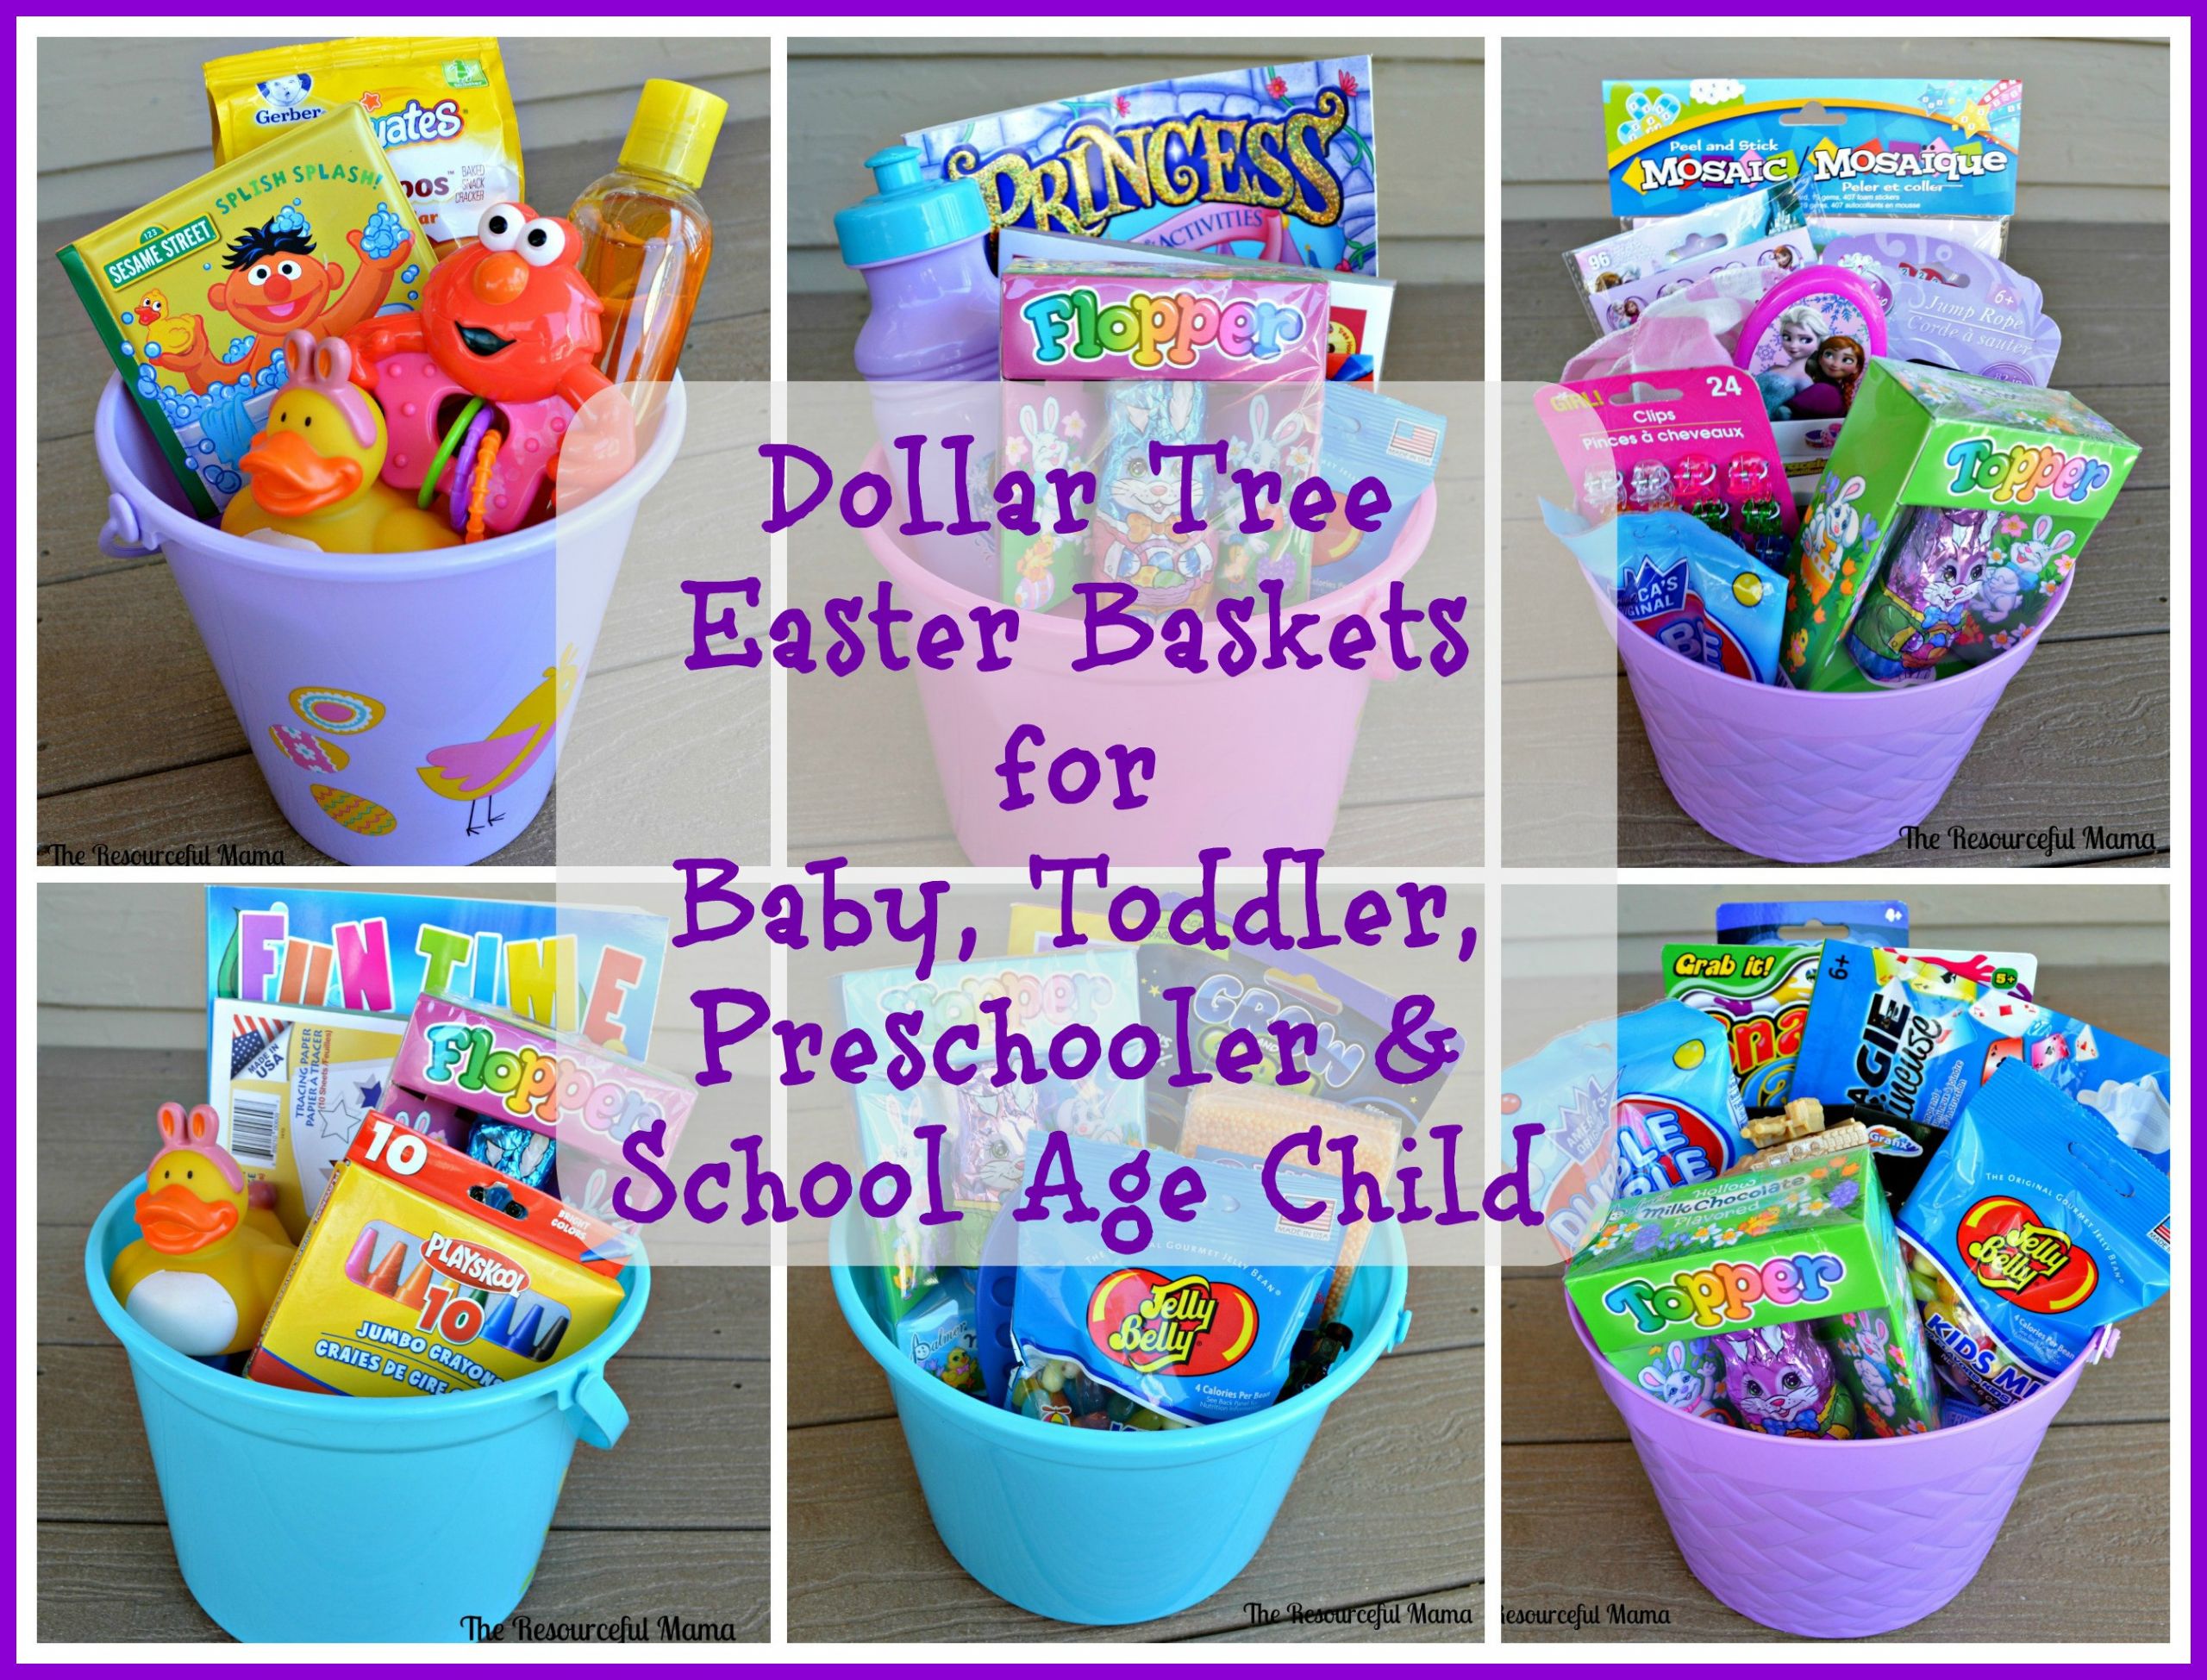 Gift Ideas For Easter Baskets
 Dollar Tree Easter Baskets The Resourceful Mama